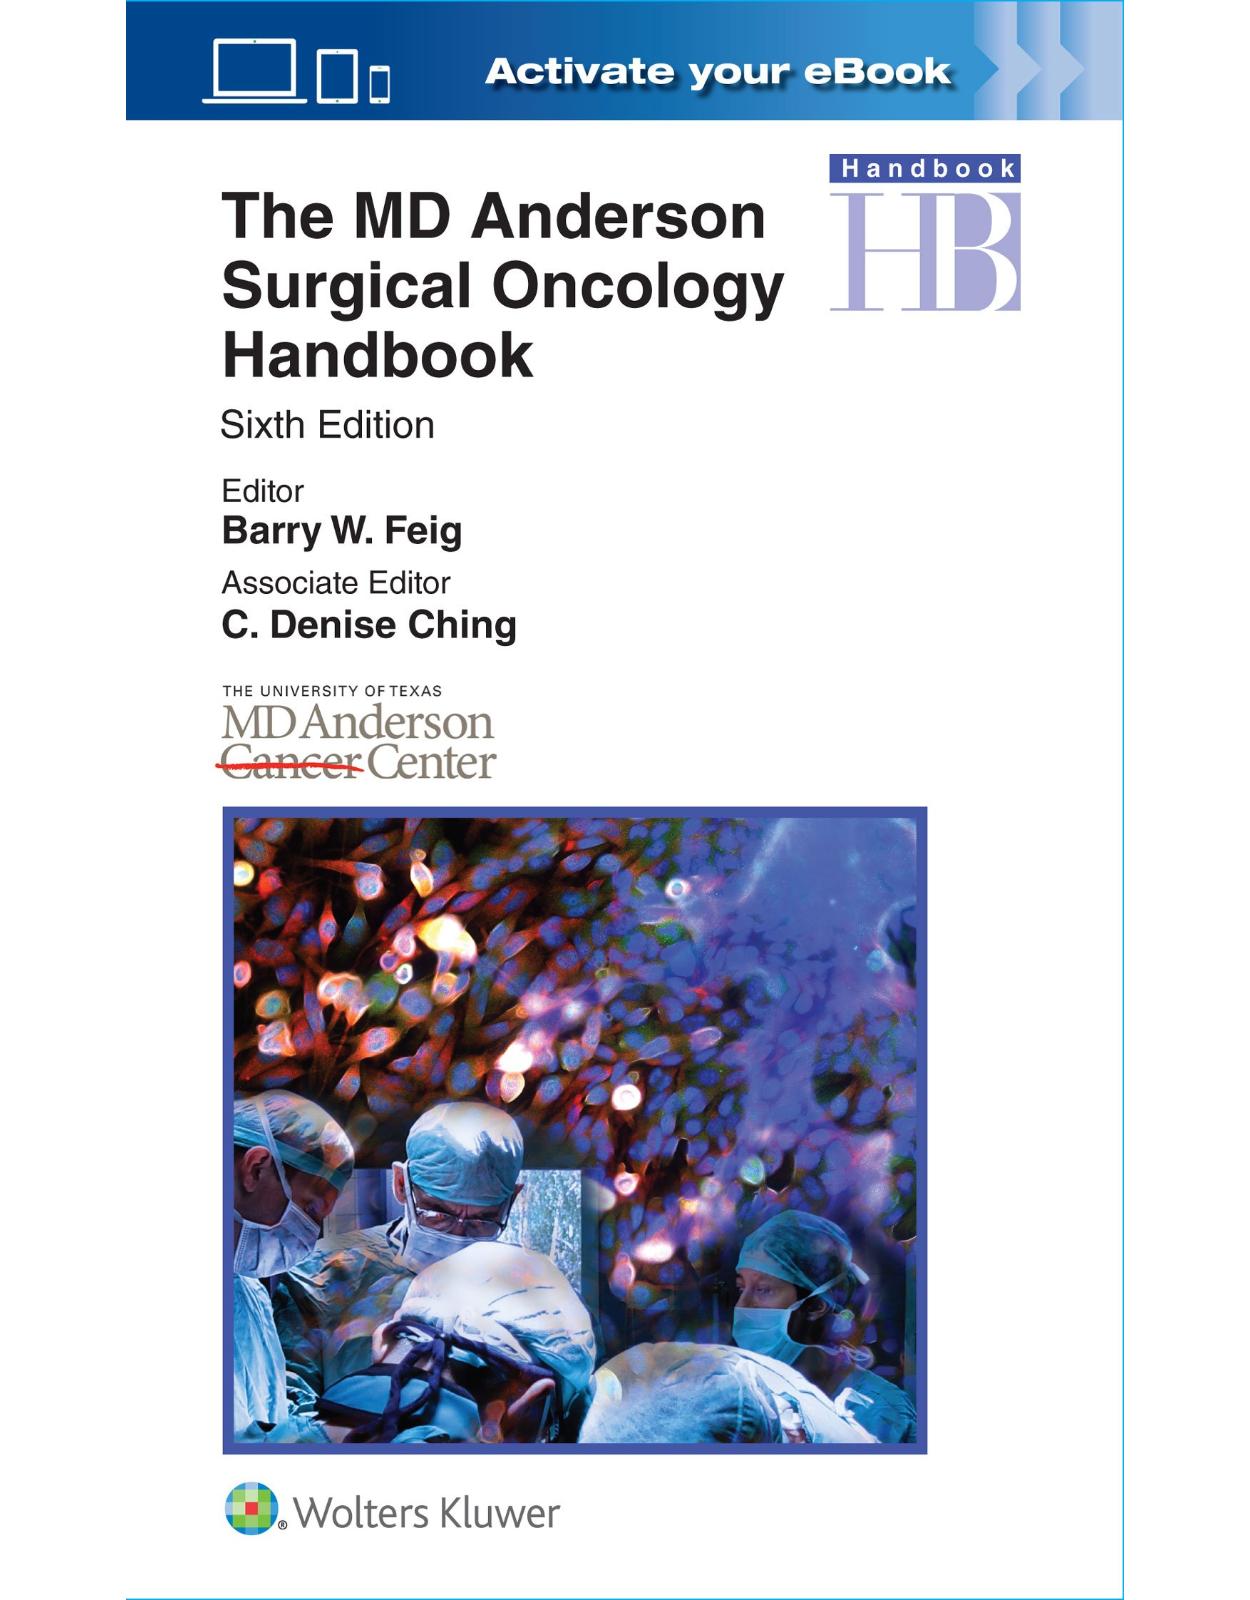 The MD Anderson Surgical Oncology Handbook, Sixth edition